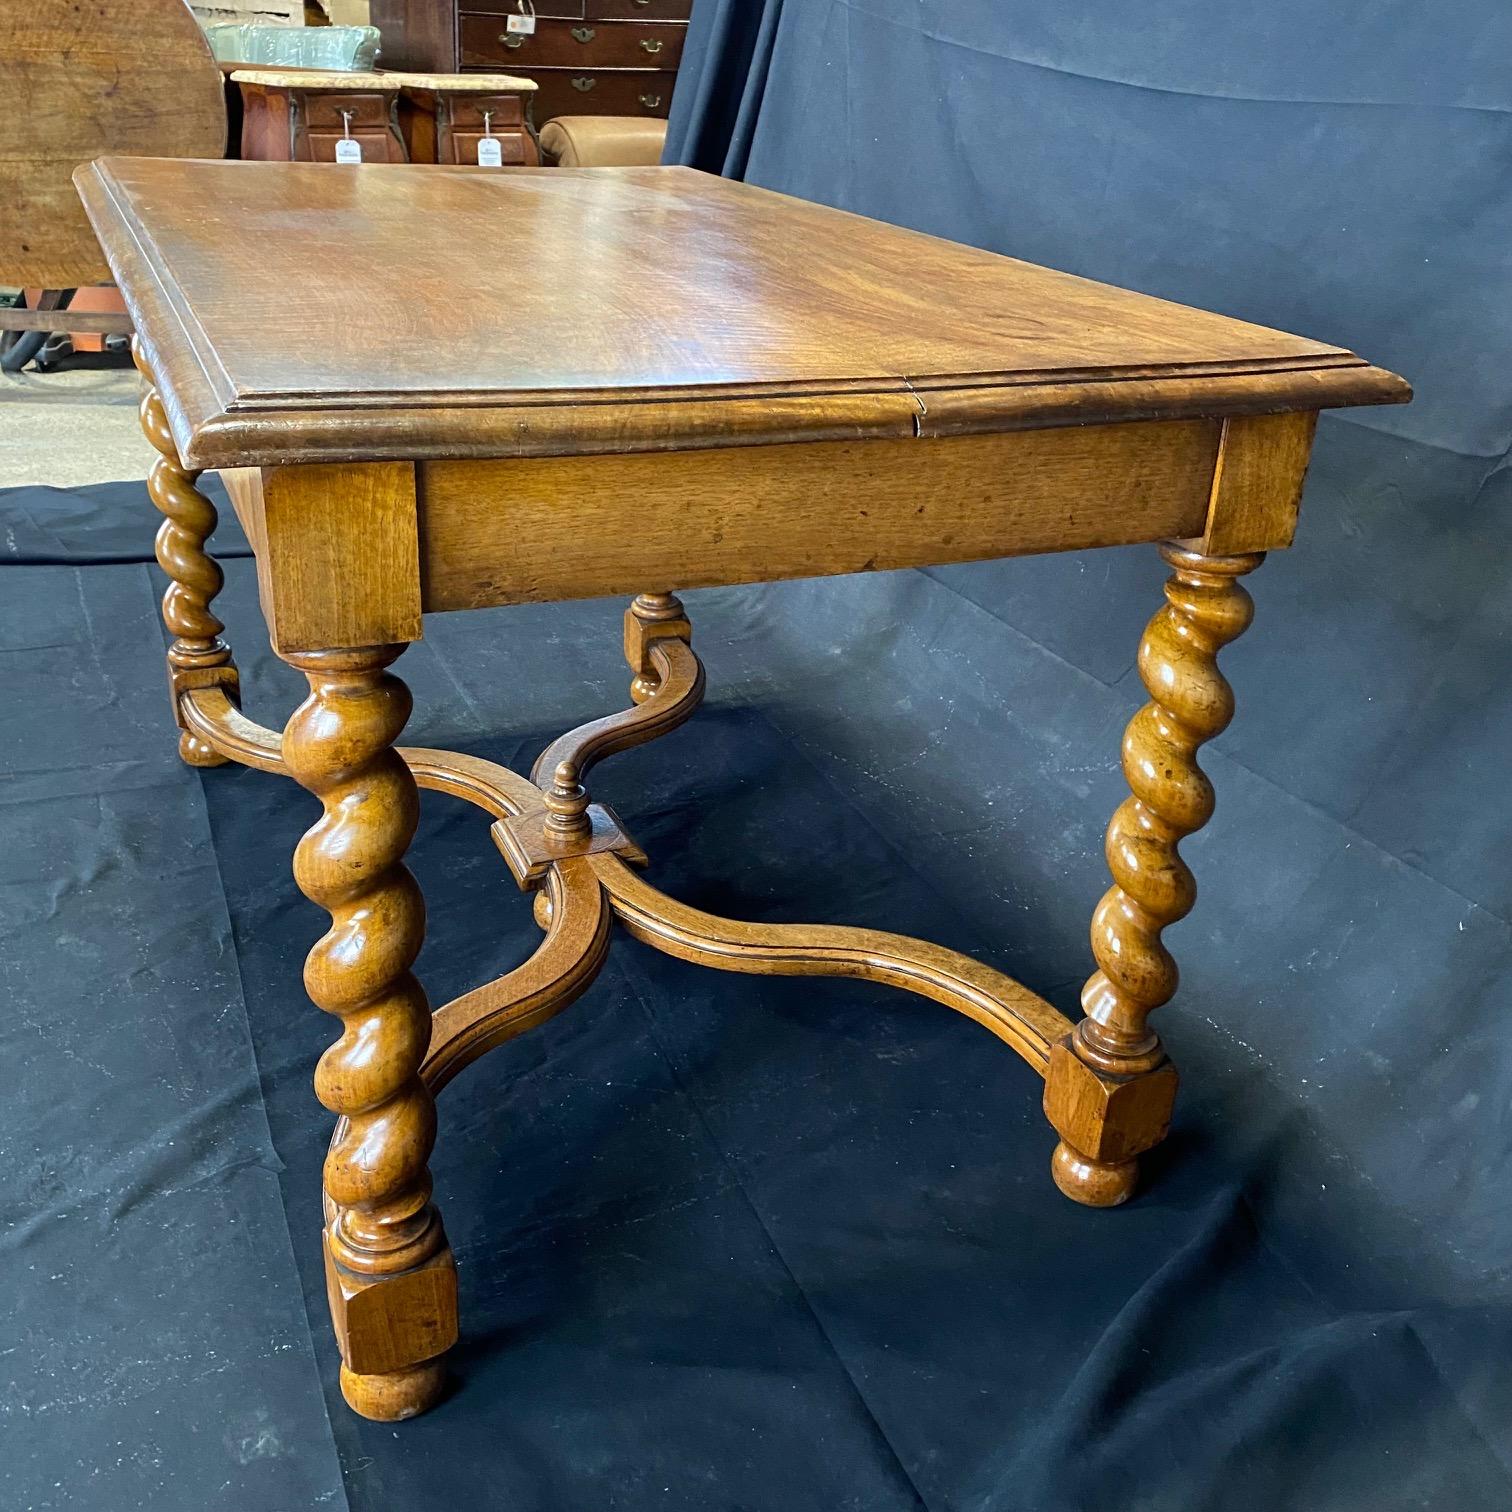 Elegant walnut French table having barley twist design with a capped pediment crowning the stretchers. Very versatile as far as uses, such as a dining table, desk or rectangular center table. The bottom stretchers are 4.5 H and have a marvelous